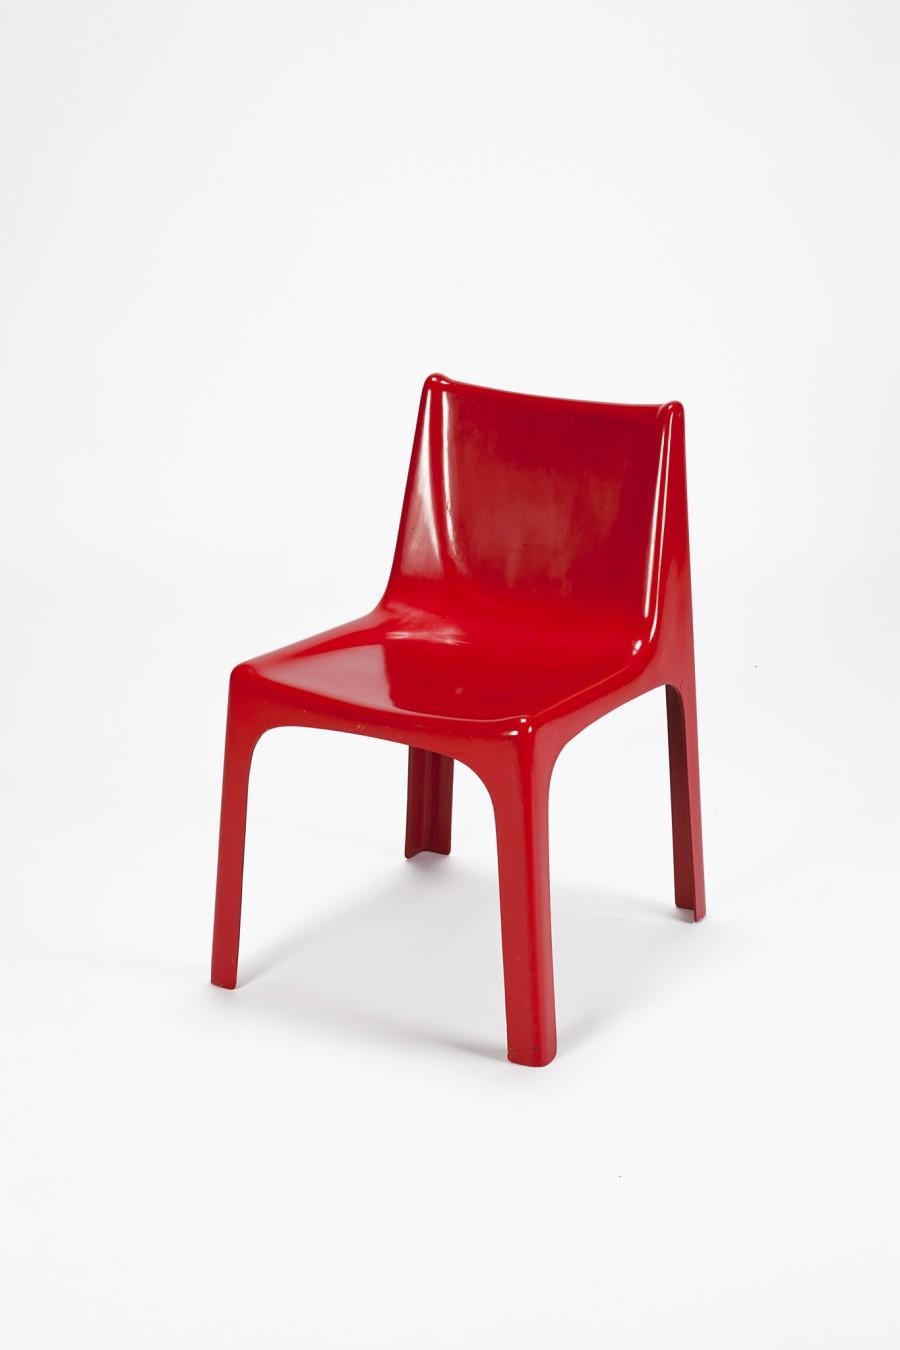 Unica I Straessle chair Vandenbeuck France 1967 first version without the slot on the side.
  